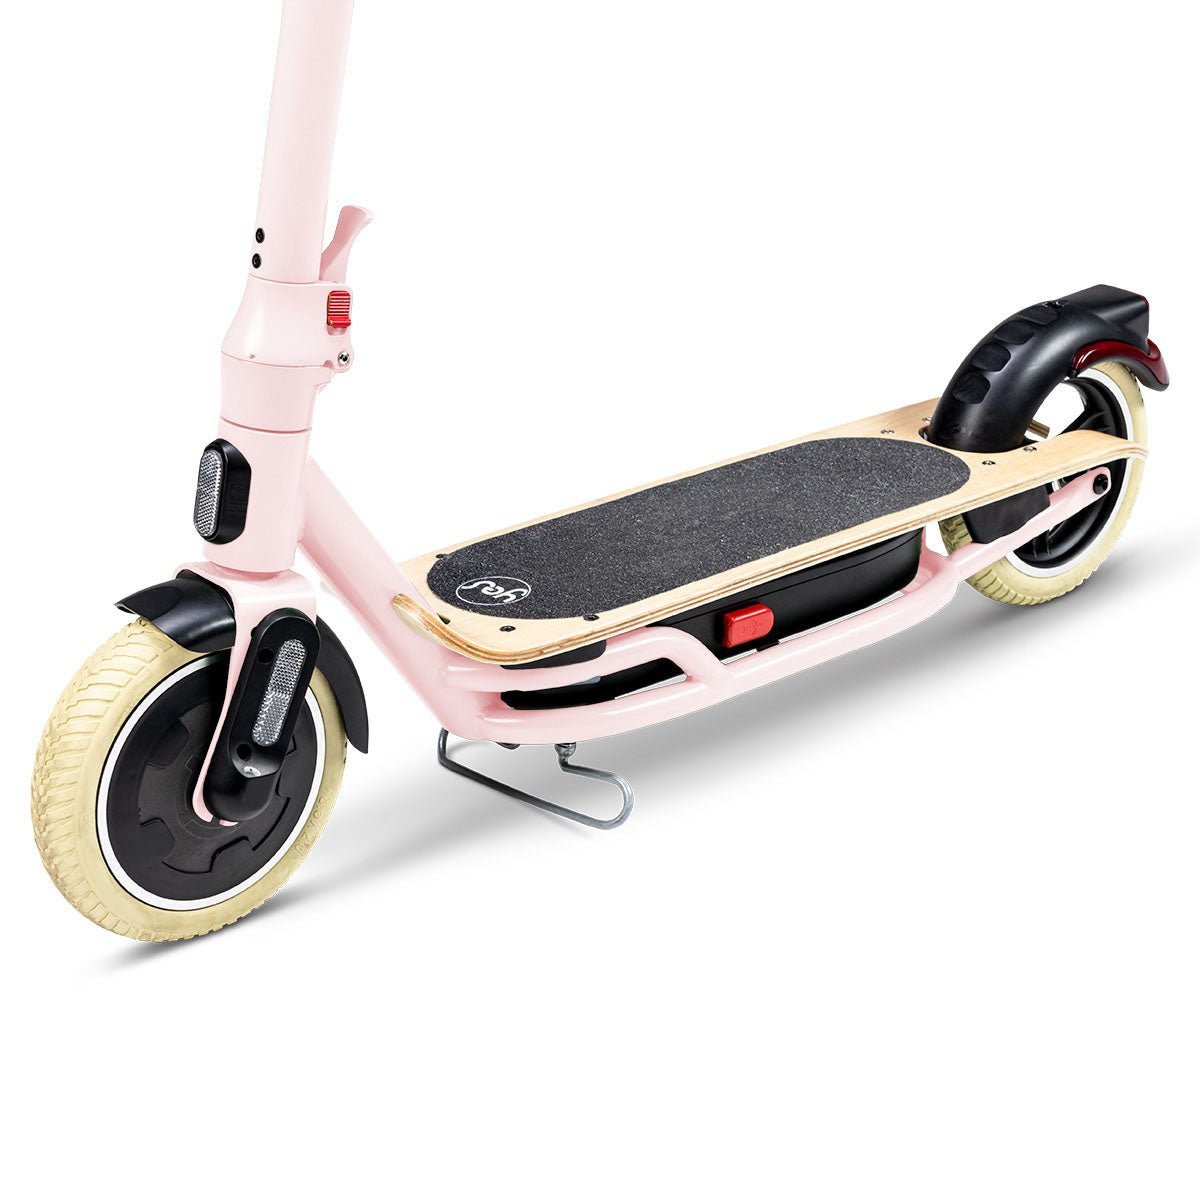 2022 Y-Volution YES 36V Lithium Folding Electric Scooter - Upzy.com